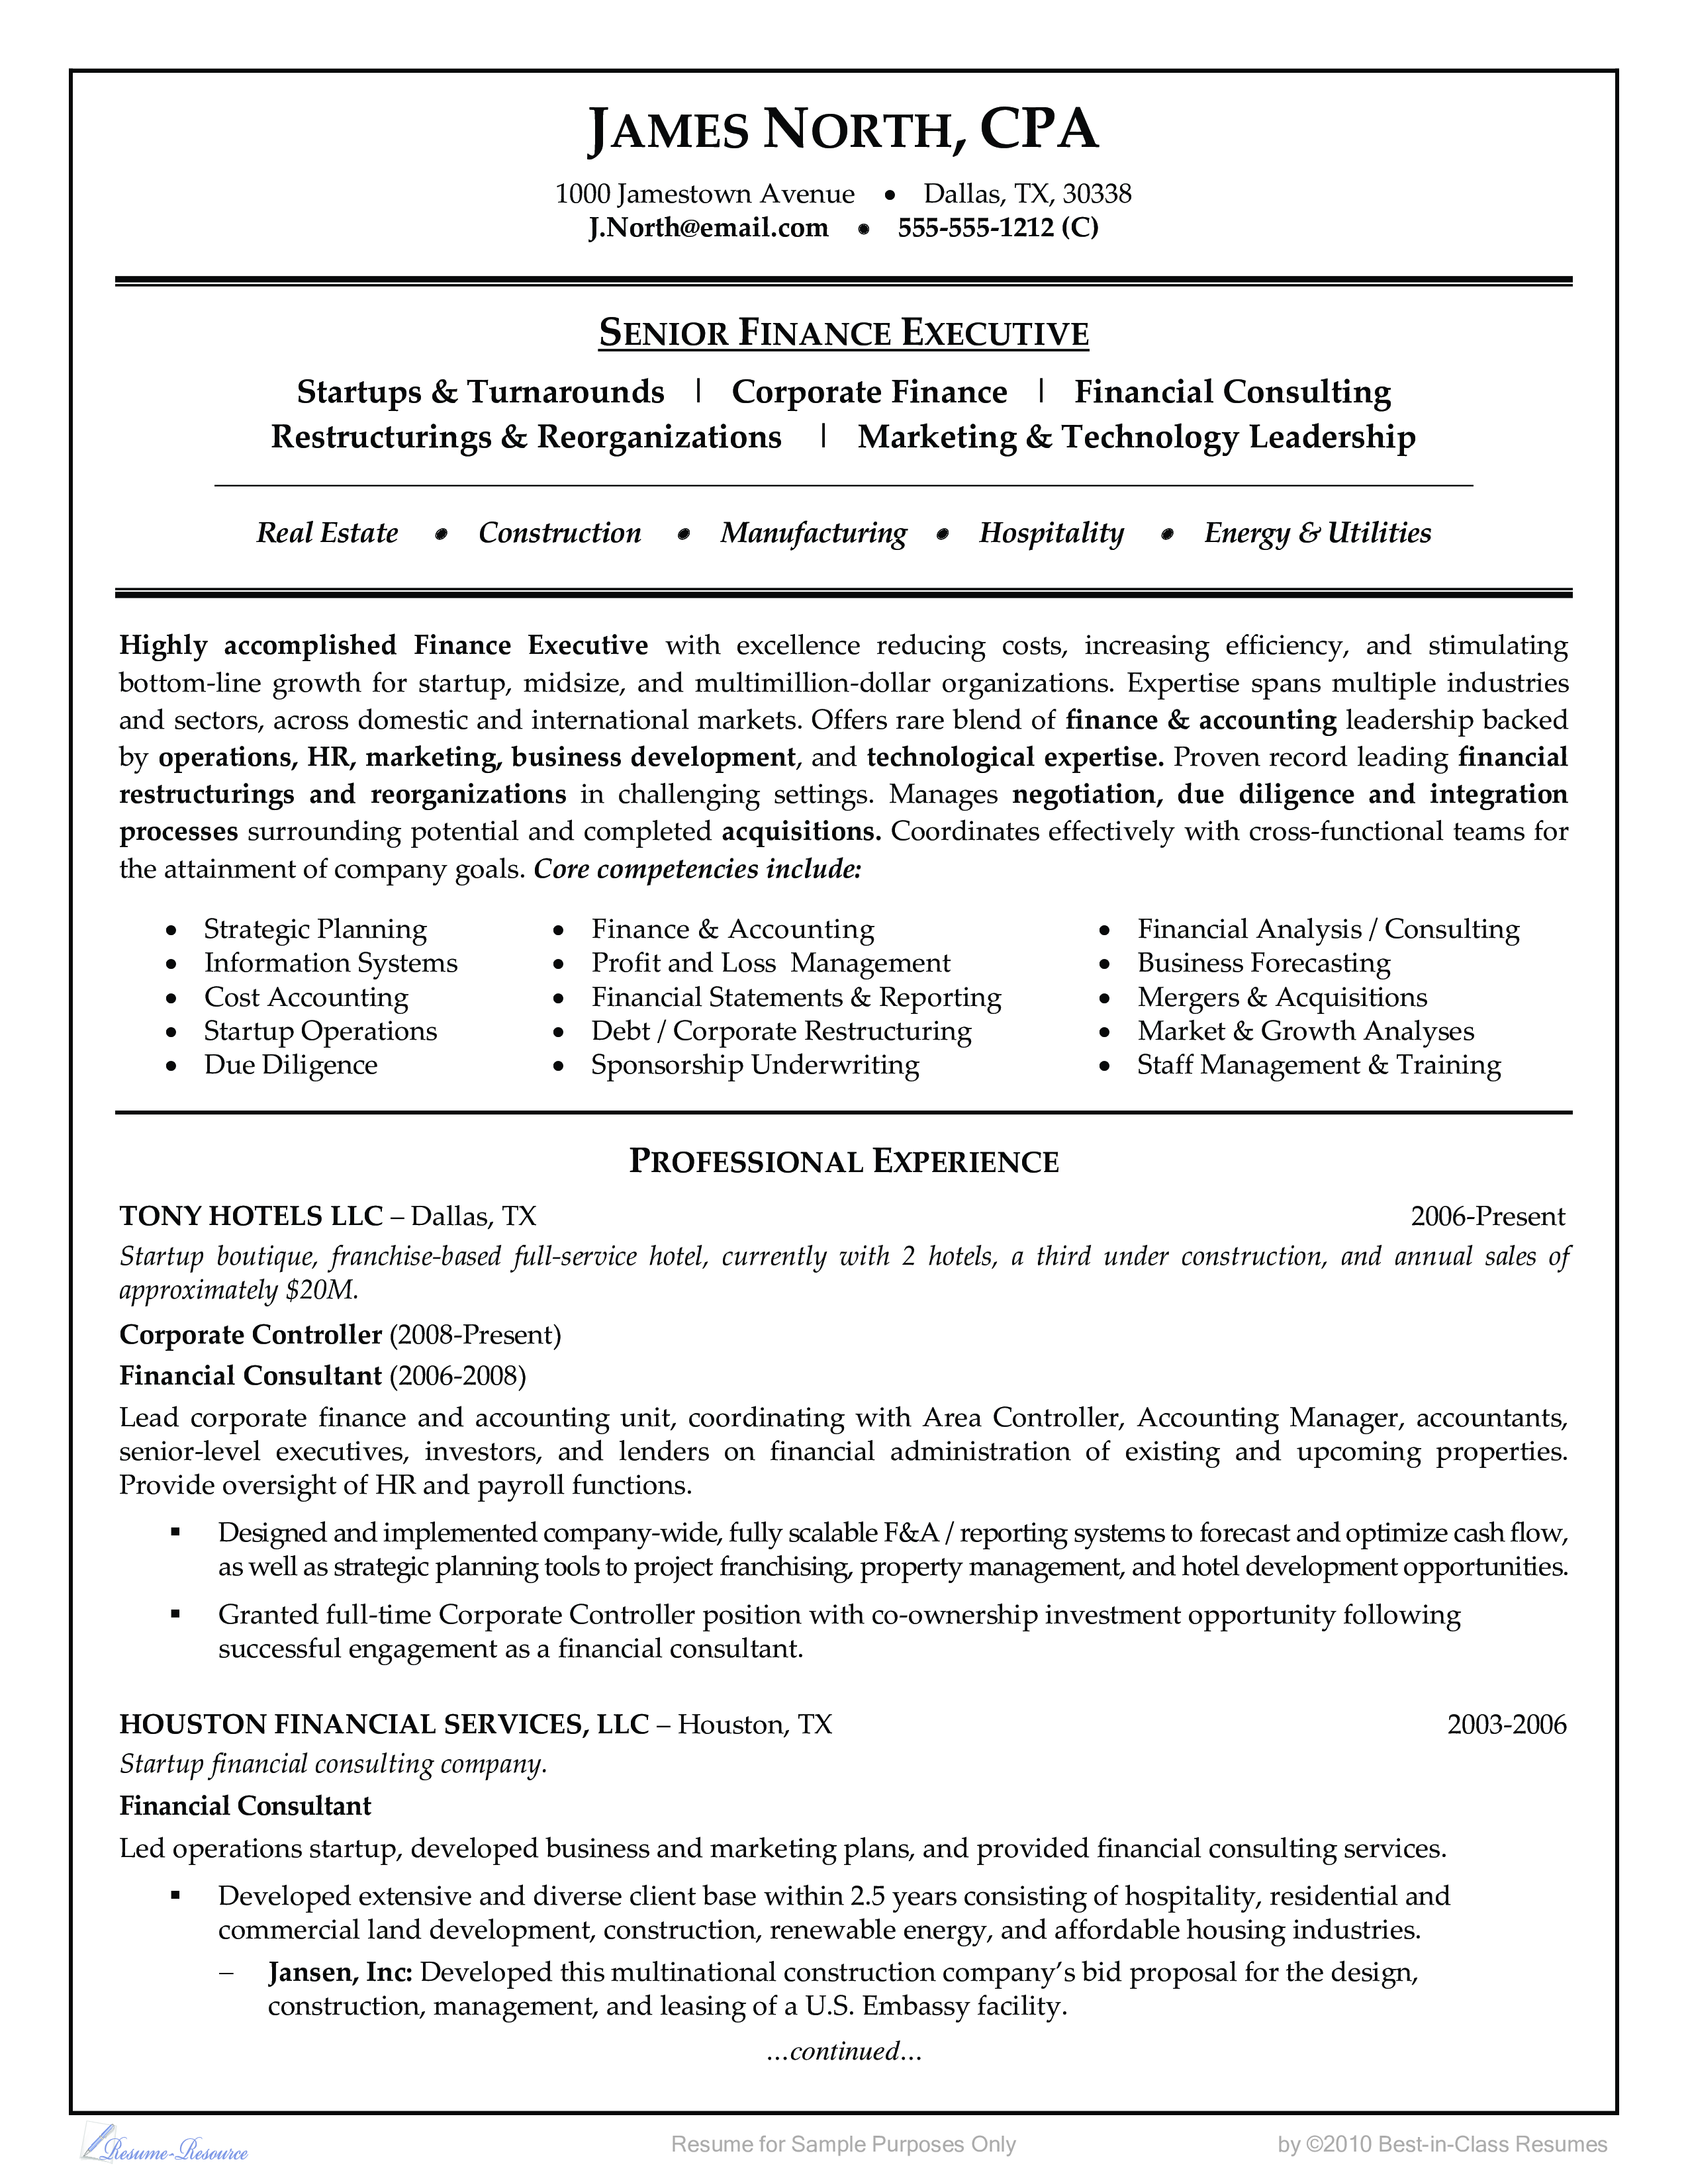 Financial Consultant Resume Example main image